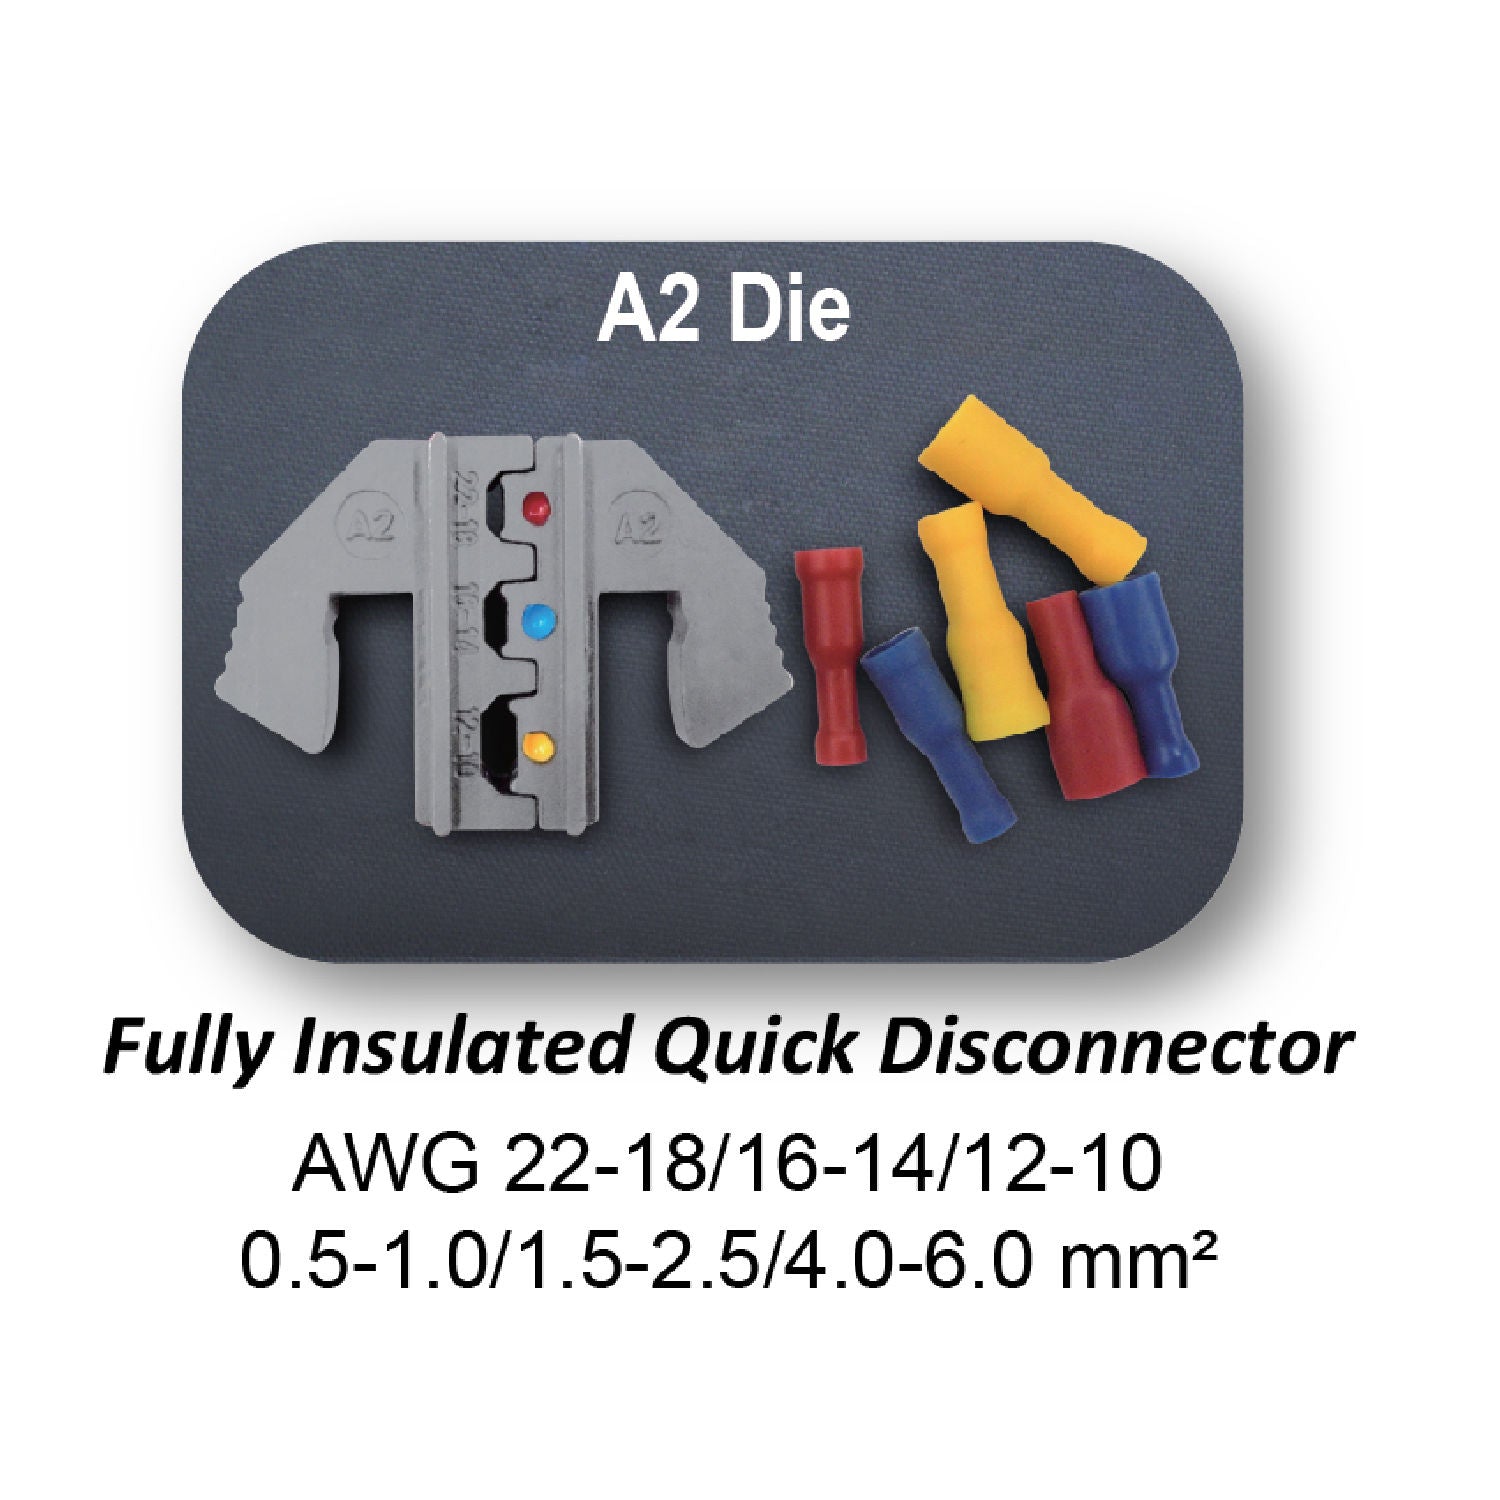 Crimping Tool Die - A2 Die for Fully Insulated Quick Disconnectors